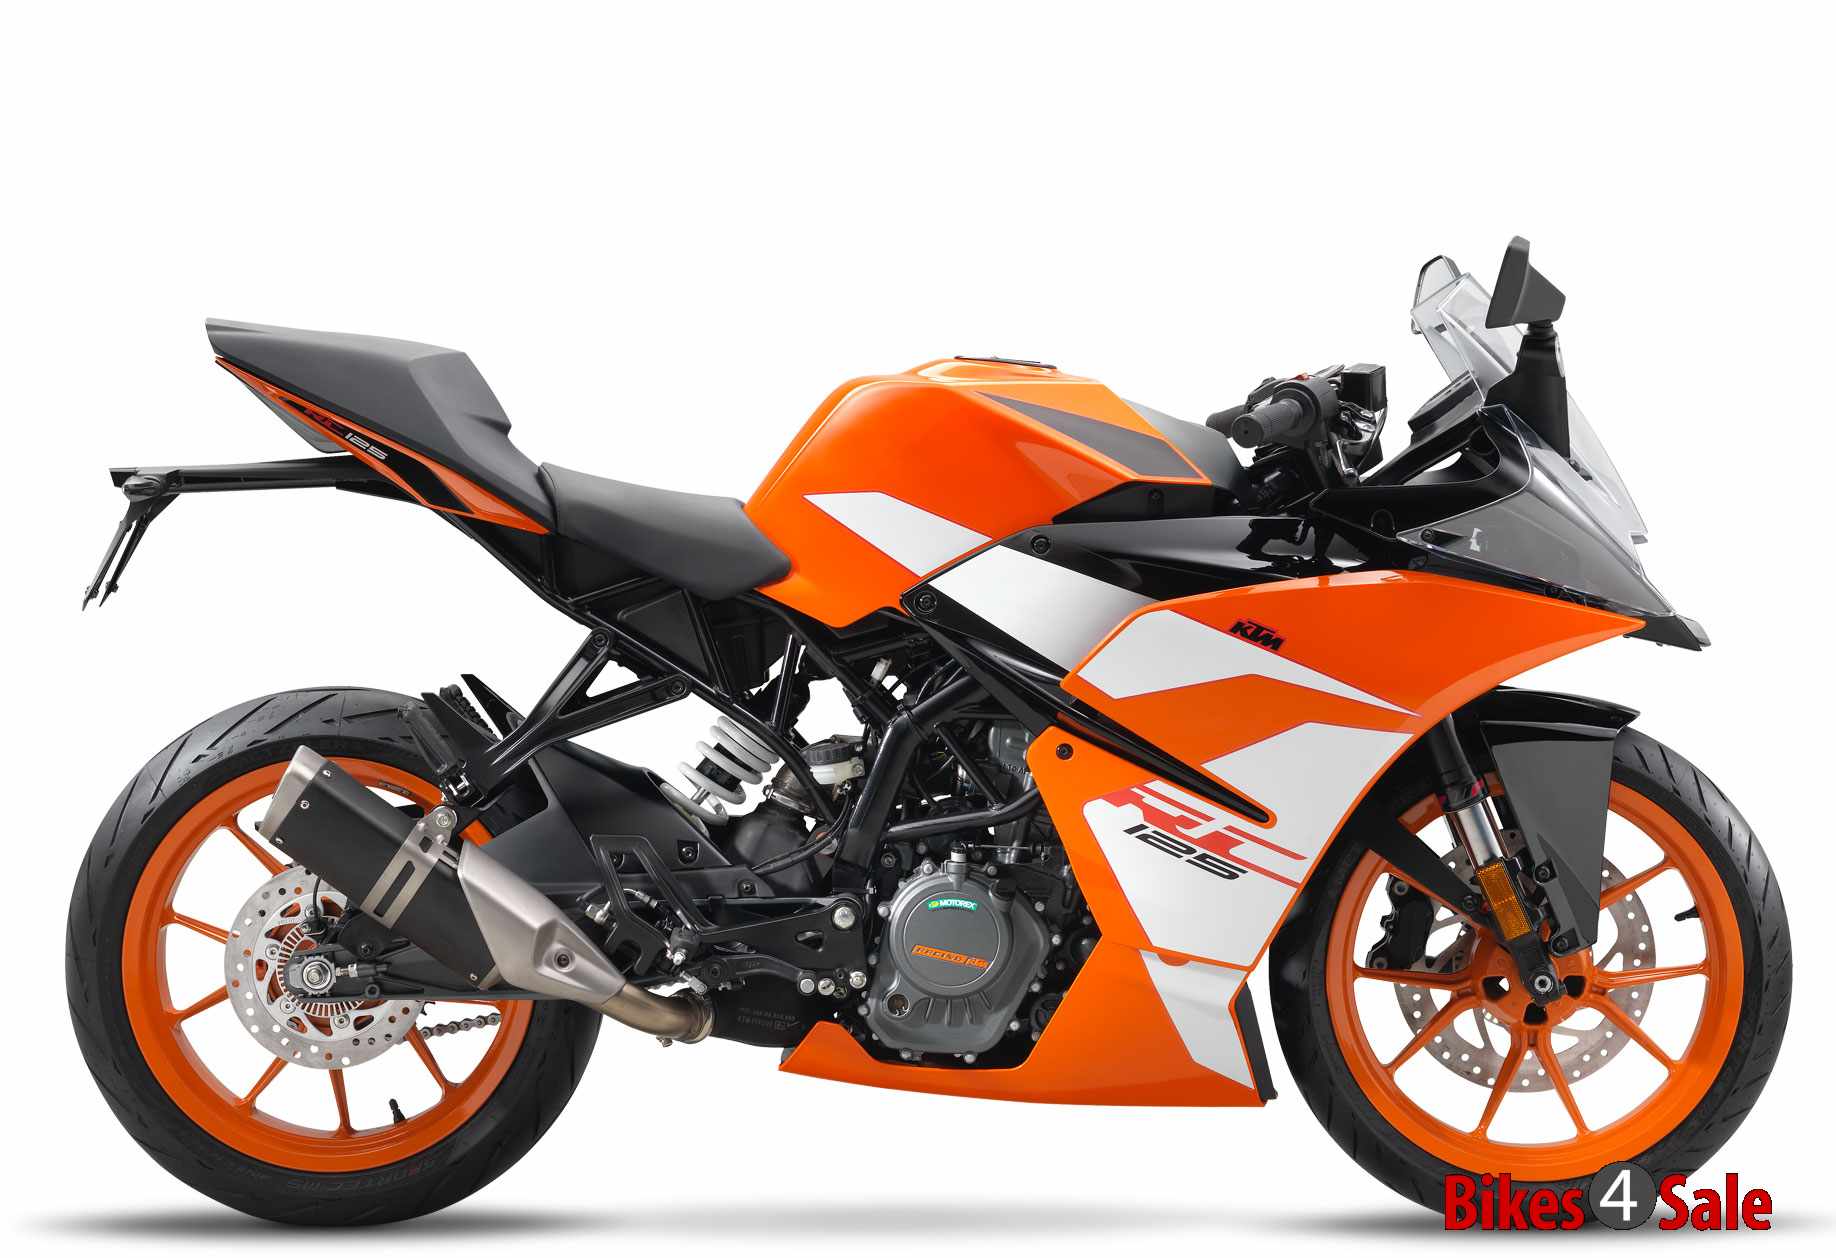 KTM RC 125 - All New 2017 RC 125